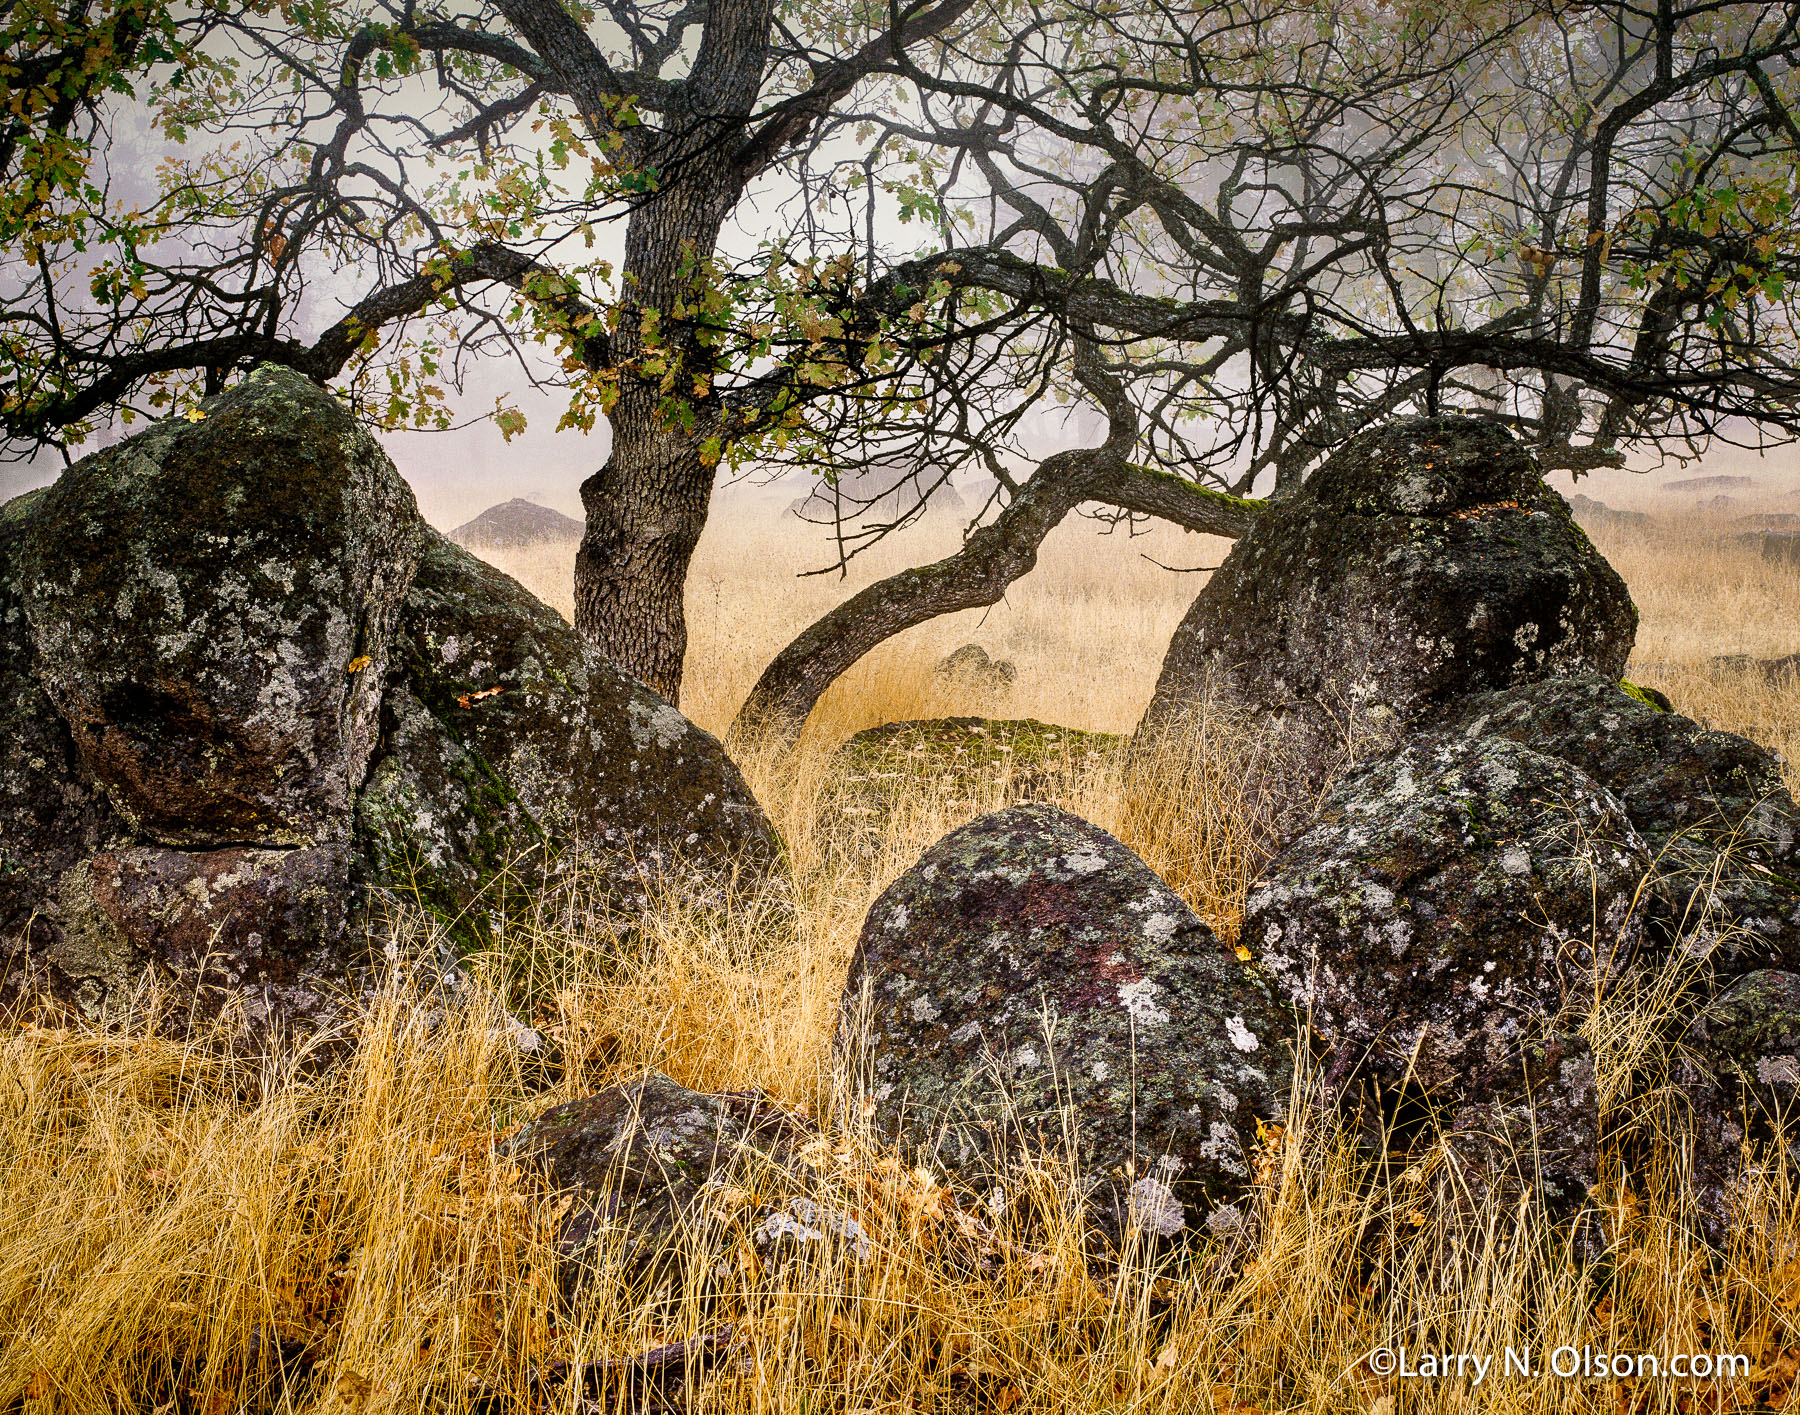 Oak Tree and Rocks, OR, # 671590 | Old growth Oak tree and enormous black bolders in a golden patch of grass.